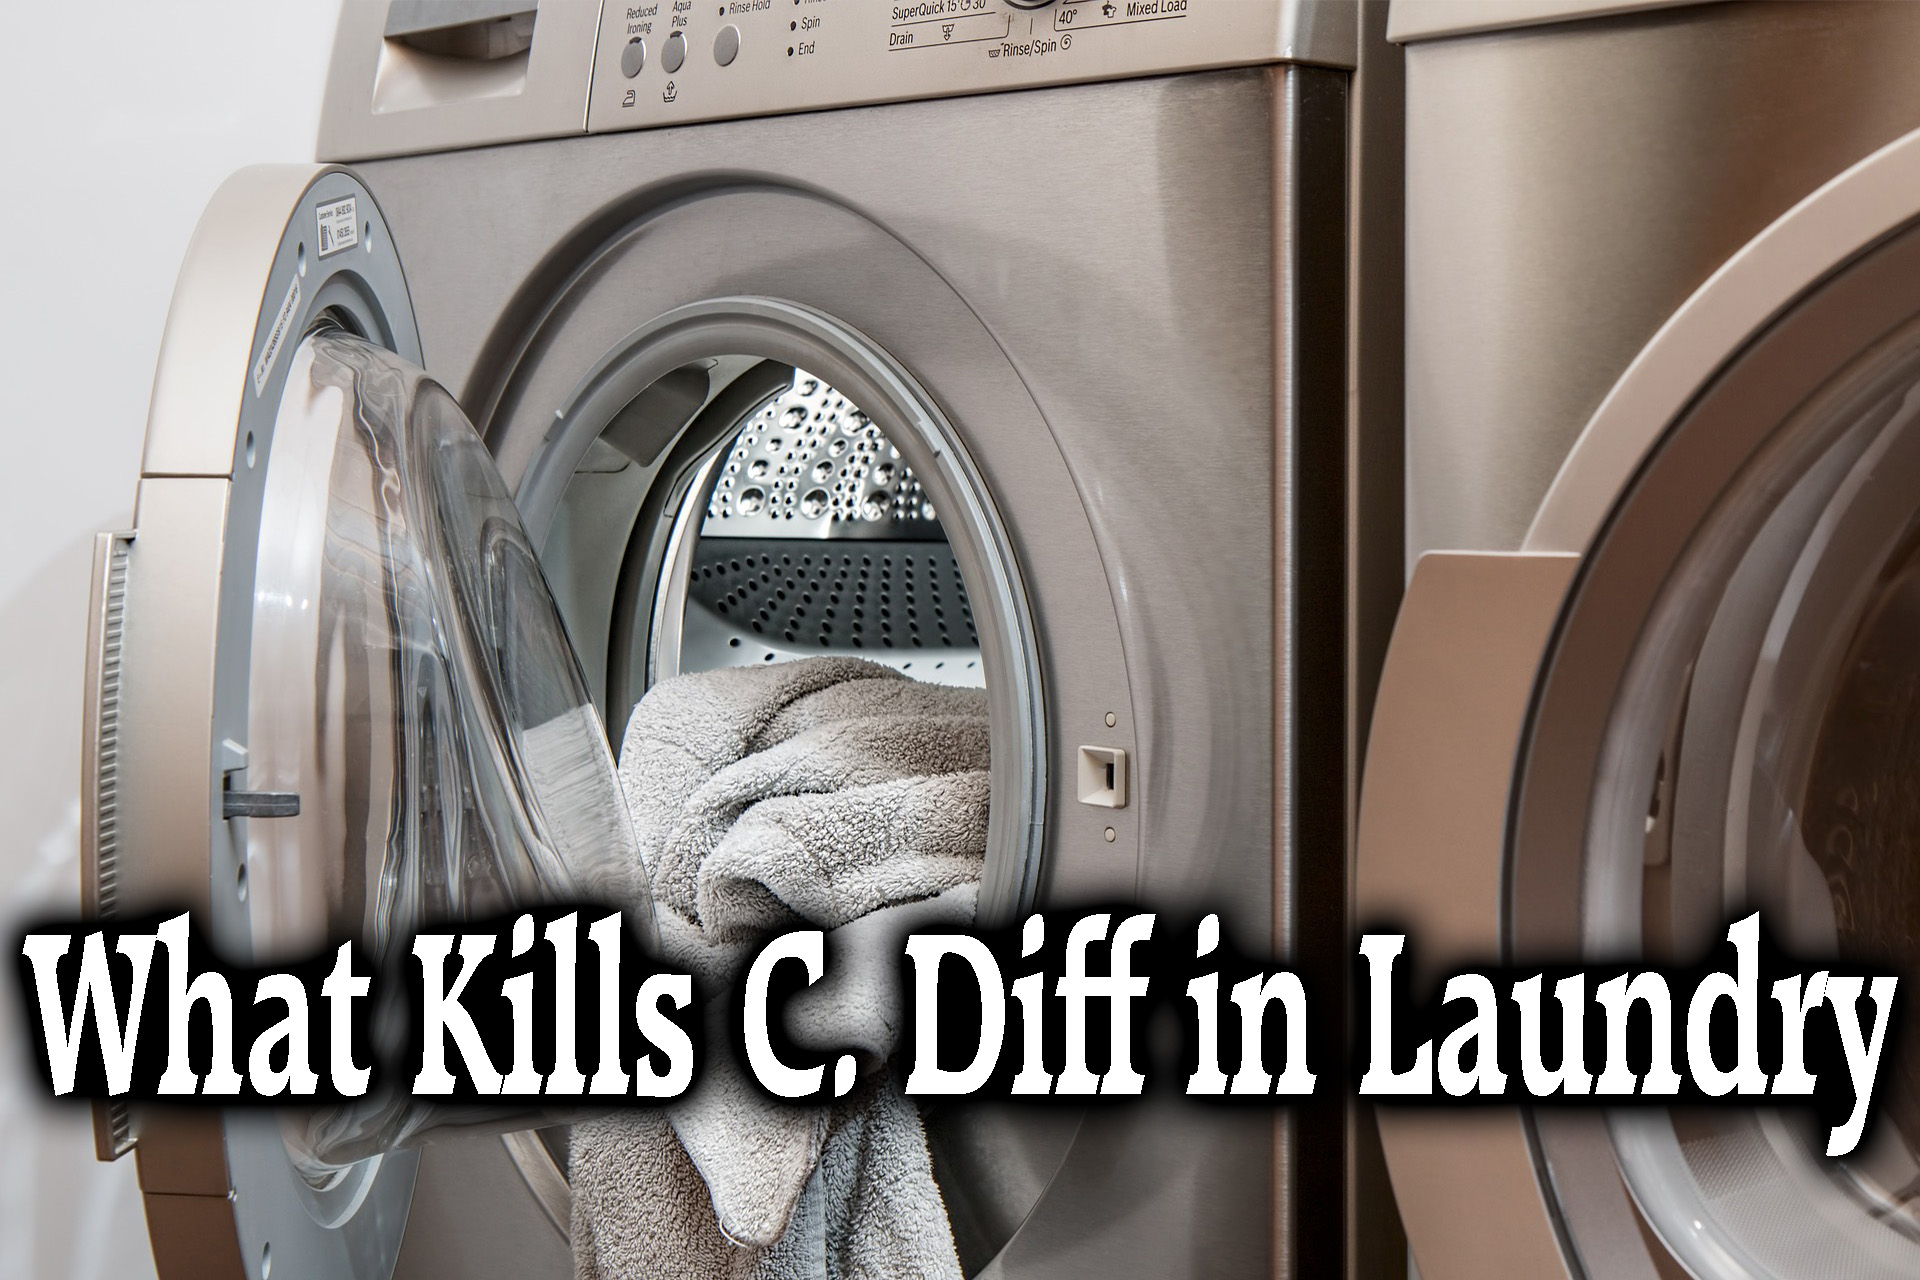 What Kills C. Diff in Laundry